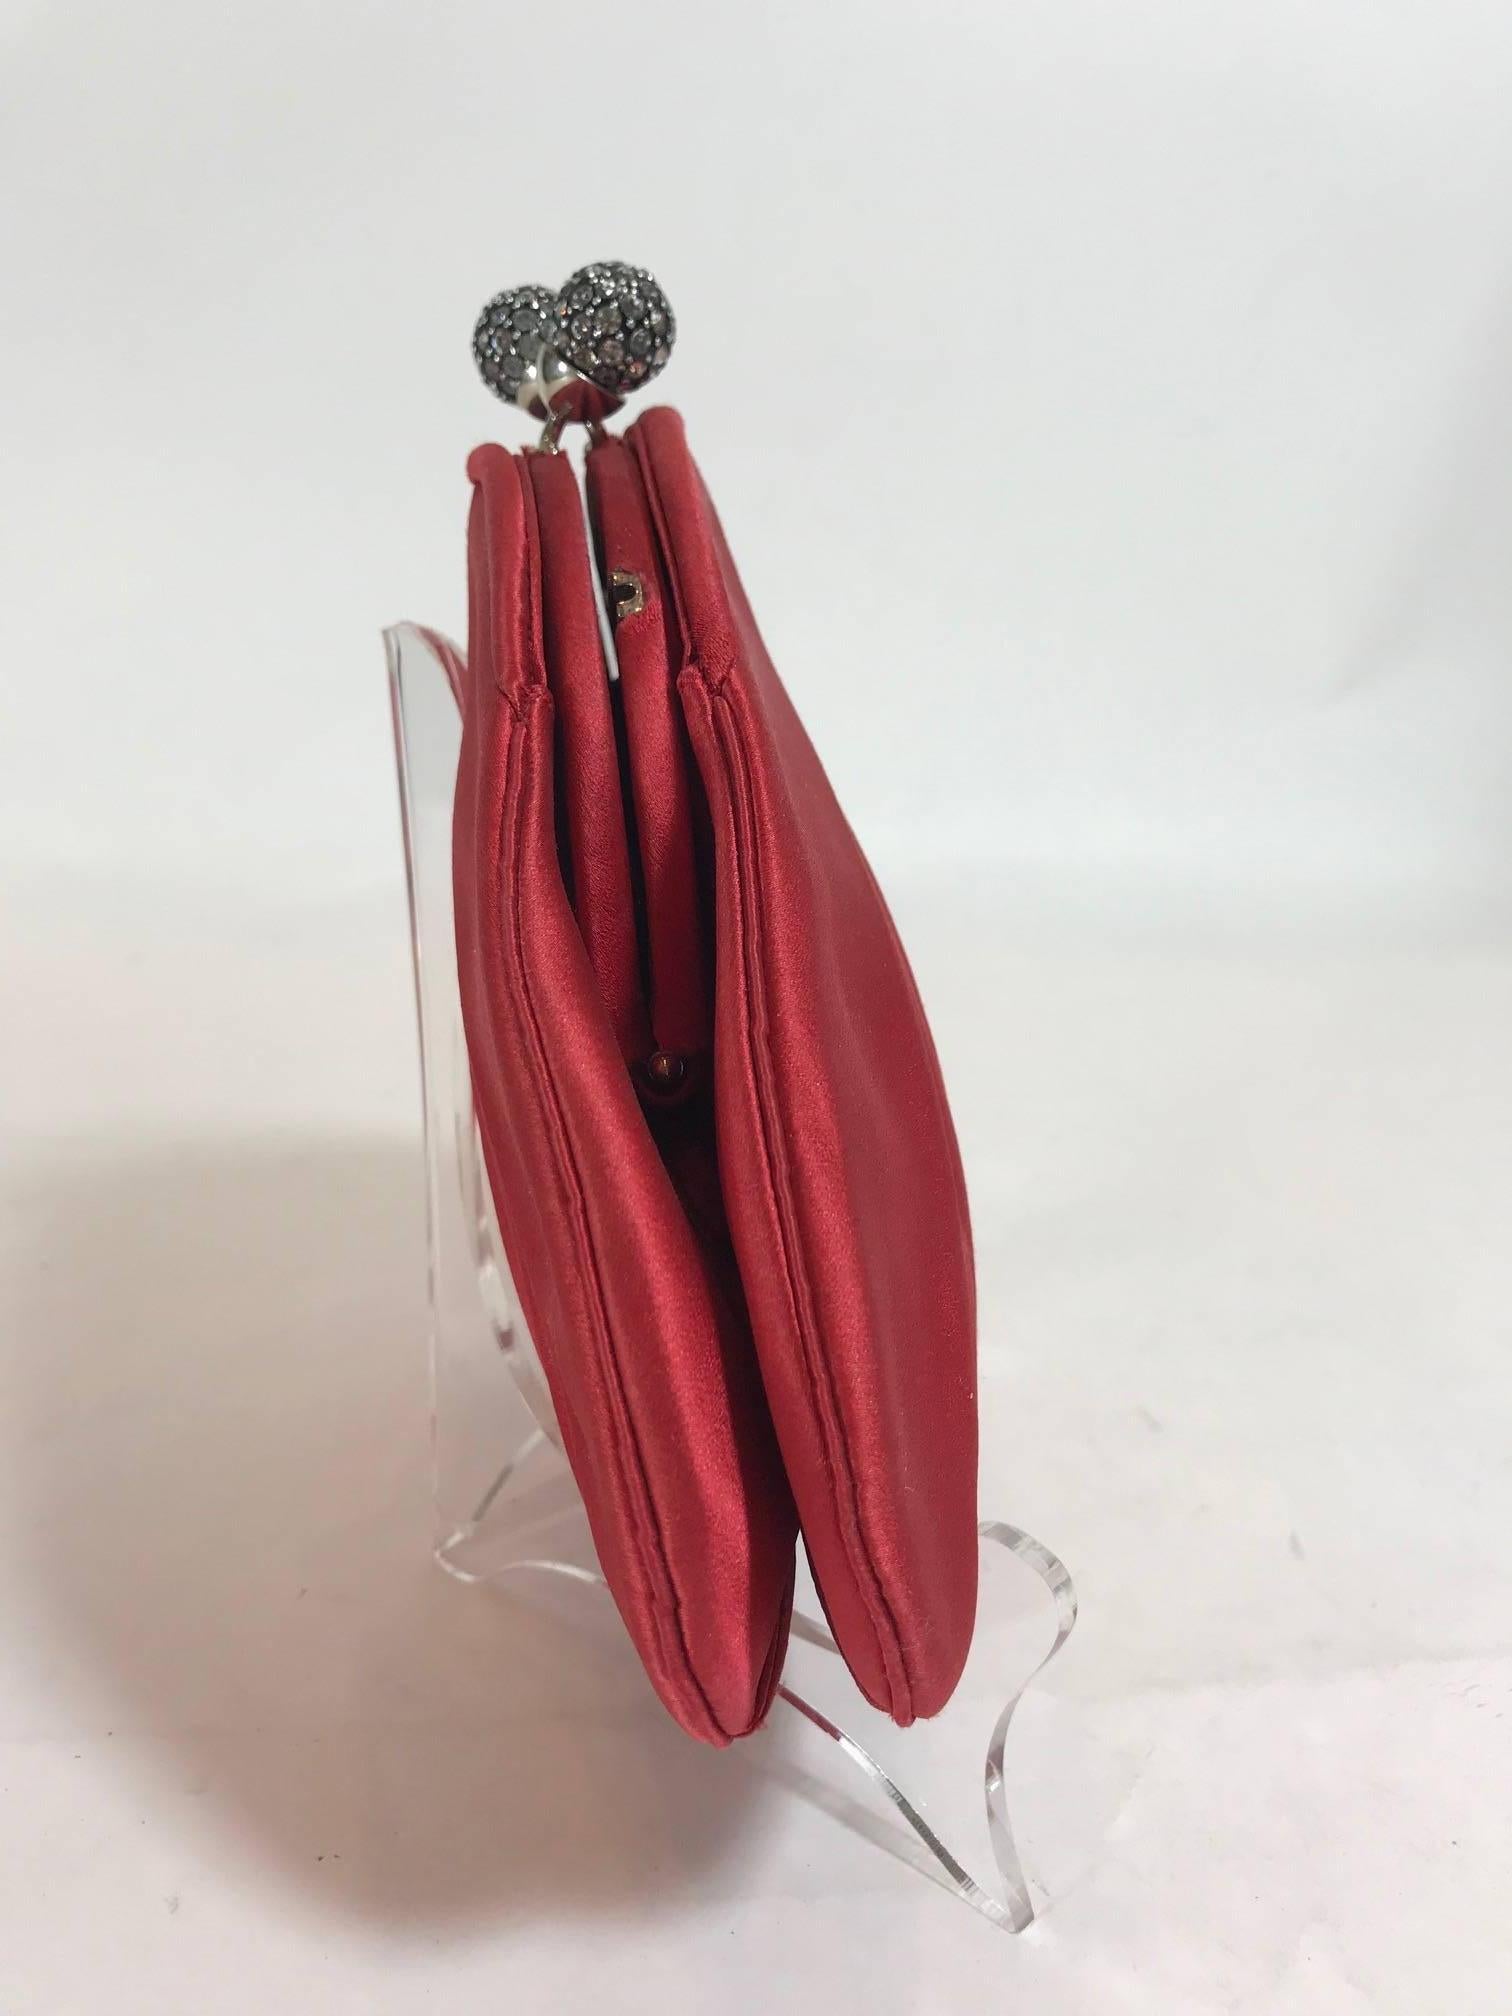 Red satin Judith Leiber evening bag enhanced by silver-tone hardware and a rhinestone encrusted kiss closure clasp. Red satin interior. Original Shoulder Strap included.
